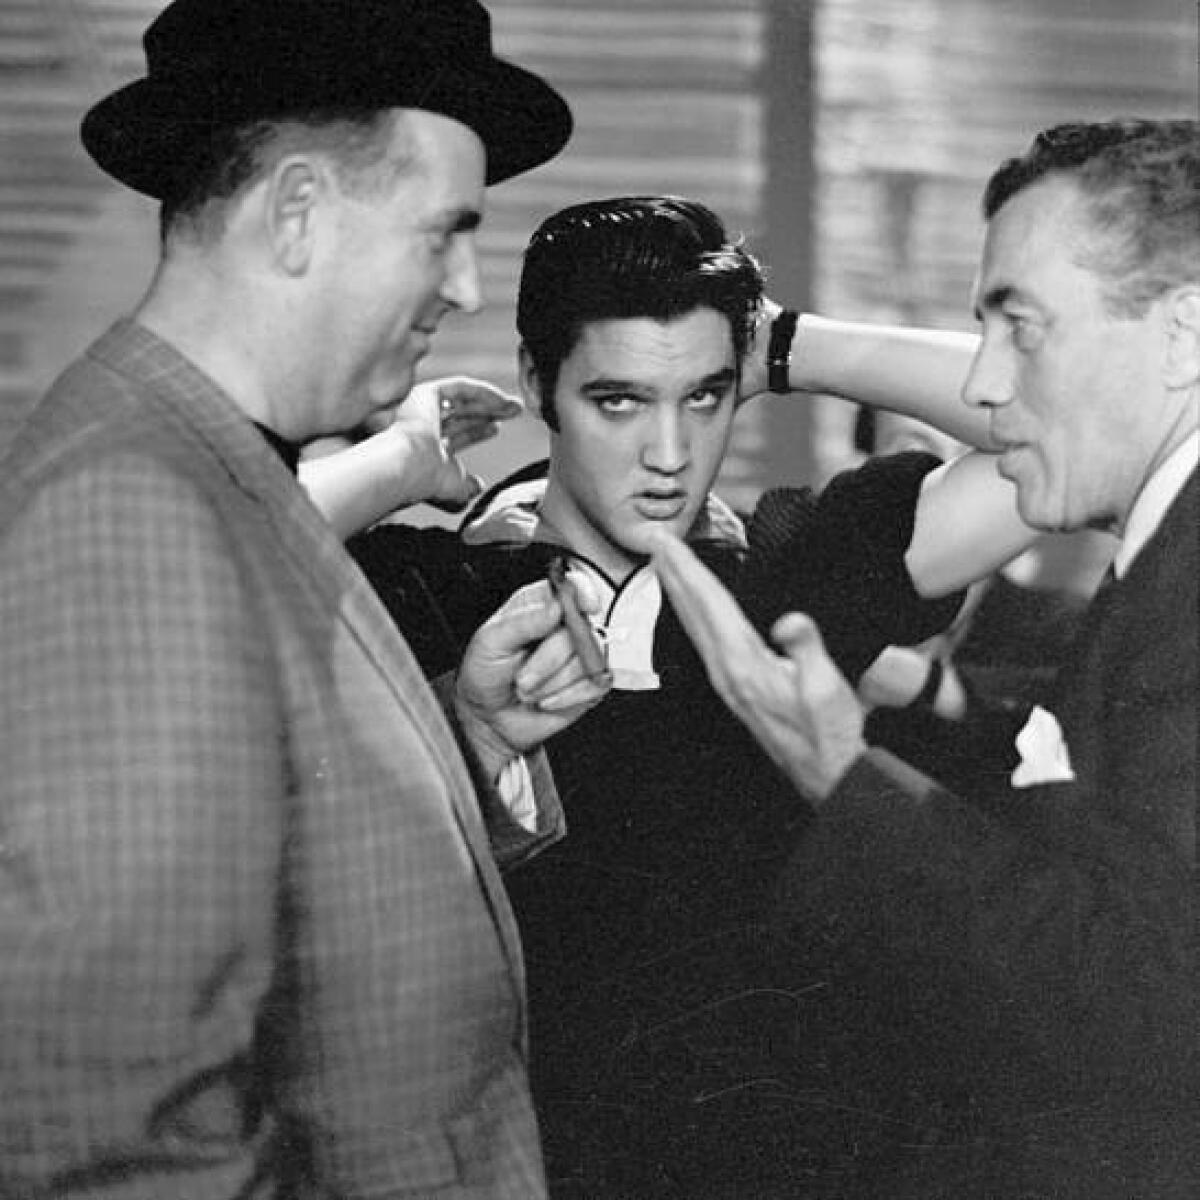 Elvis Presley, center, with his manager, Col. Tom Parker, left, and host Ed Sullivan before Presley's second appearance on "The Ed Sullivan Show," Oct. 28, 1956.